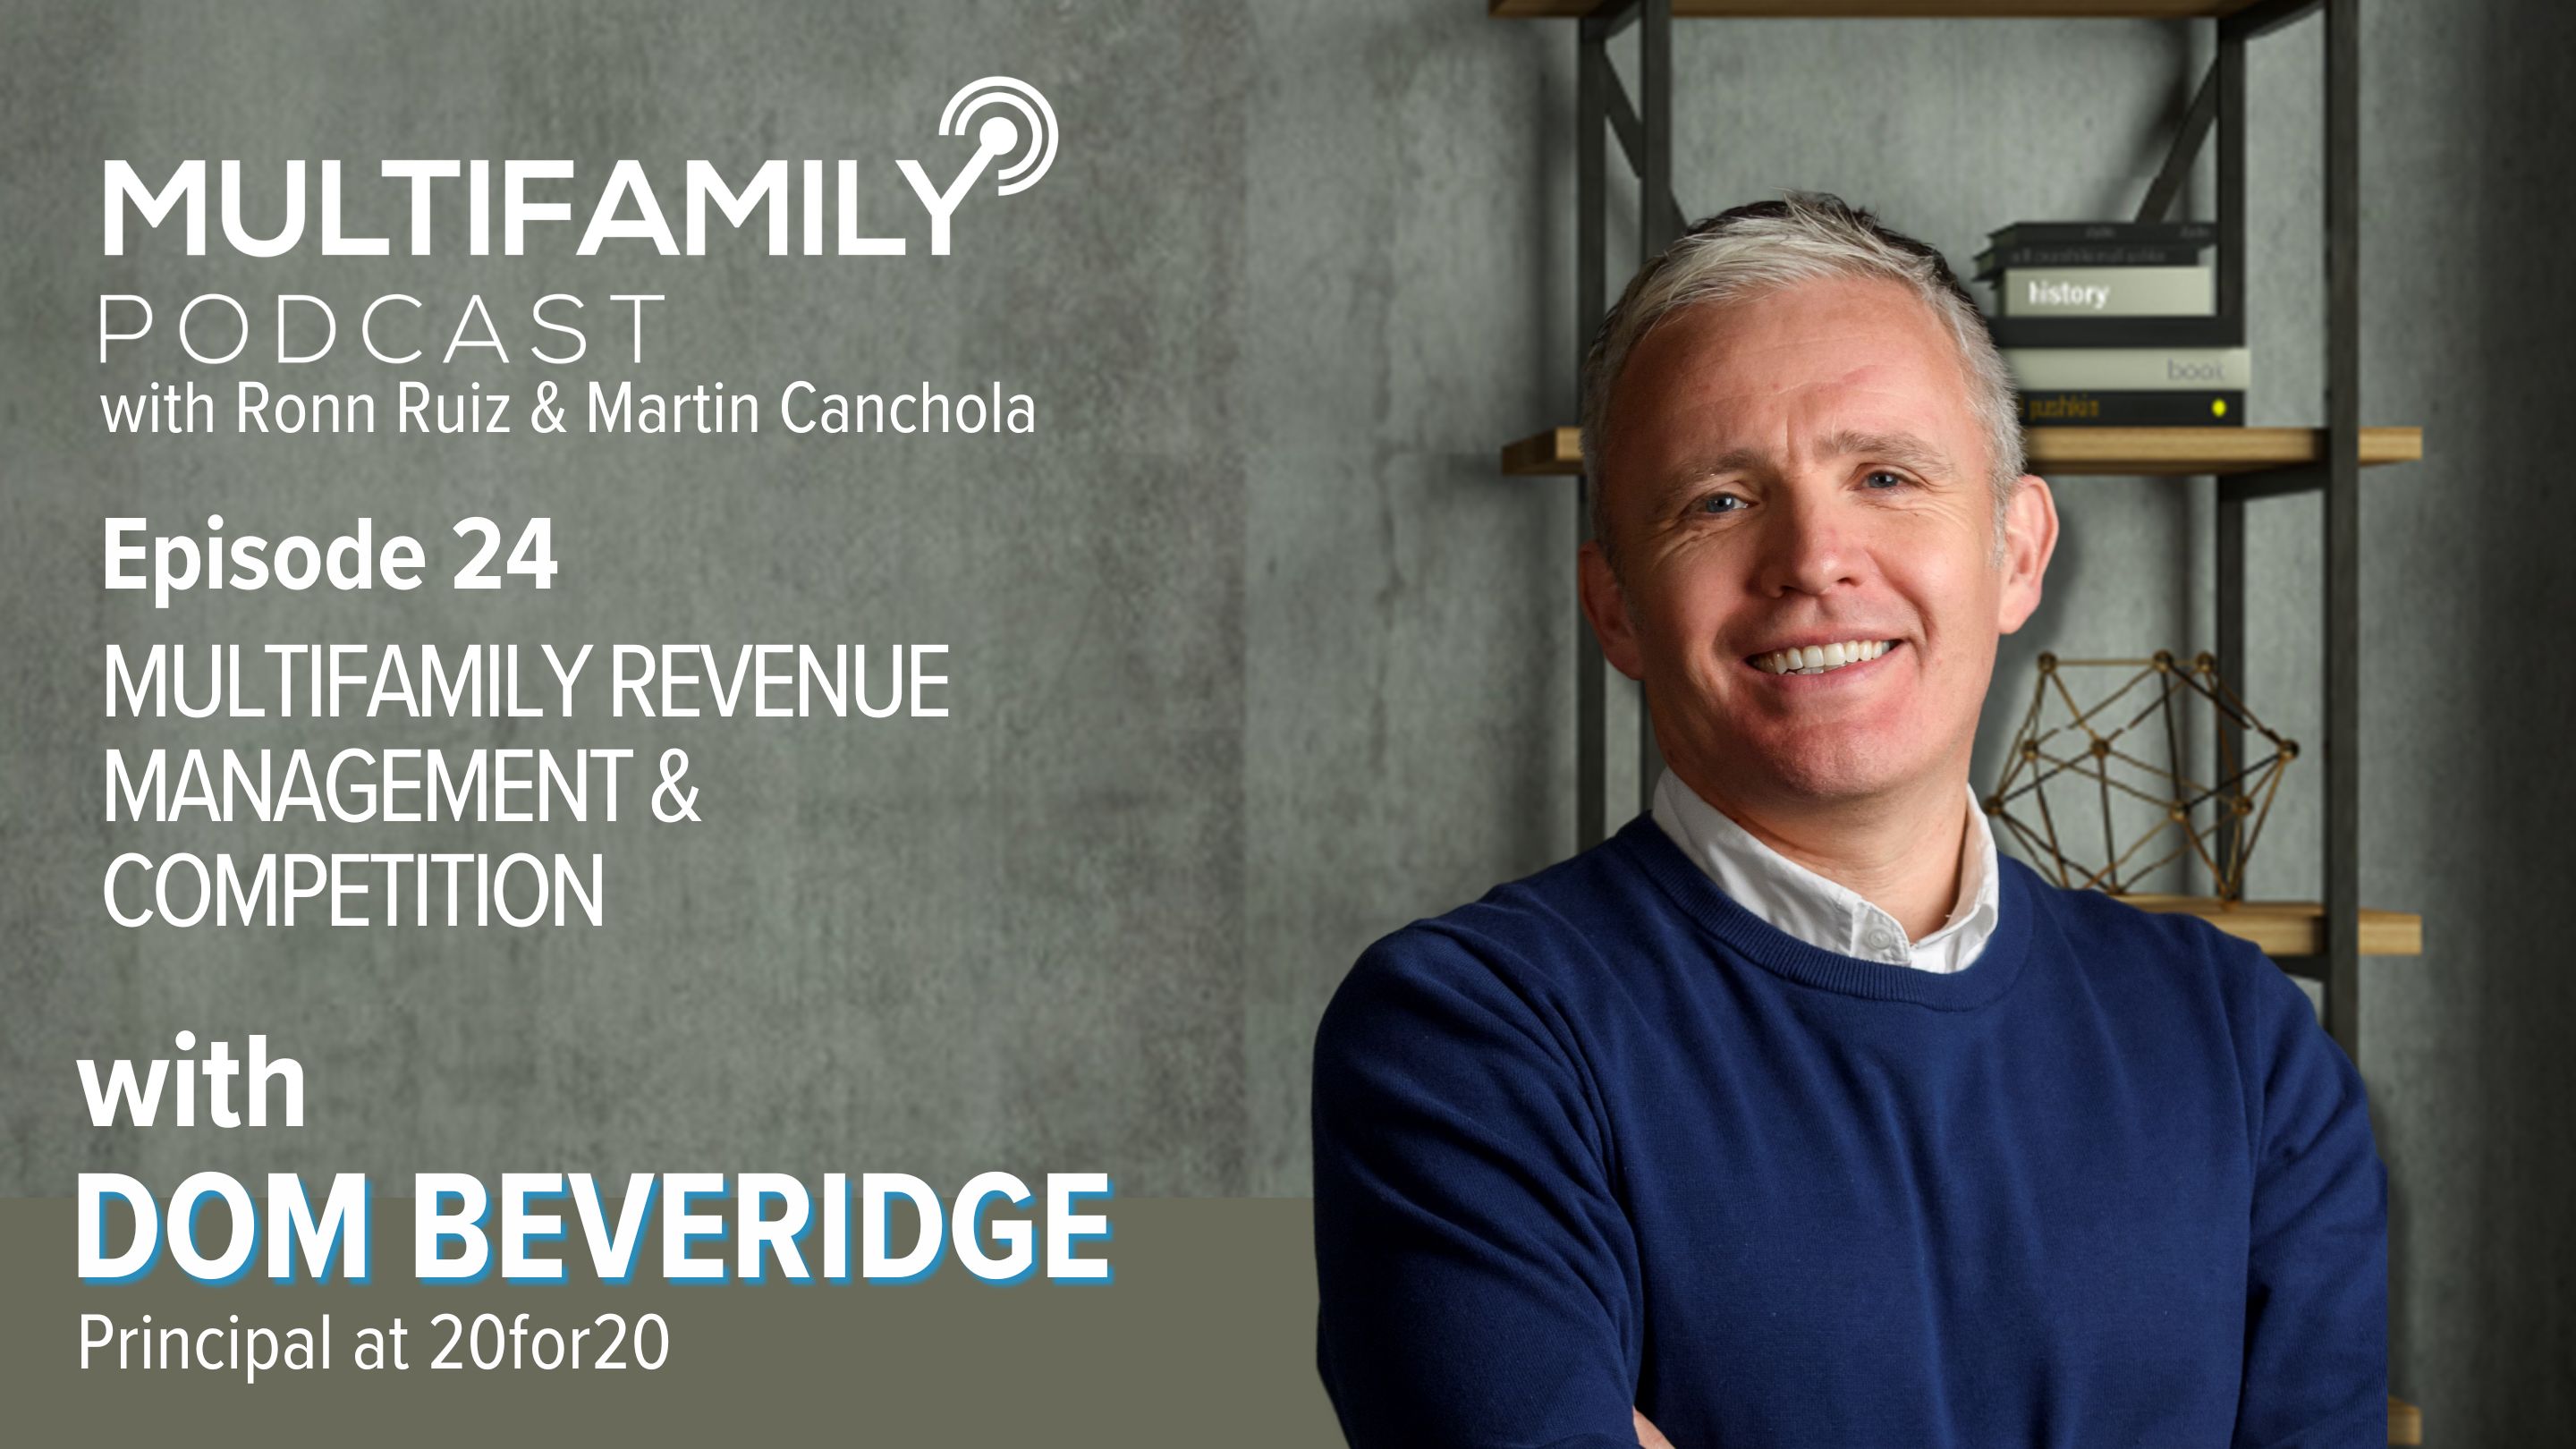 The Multifamily Podcast - Revenue Management